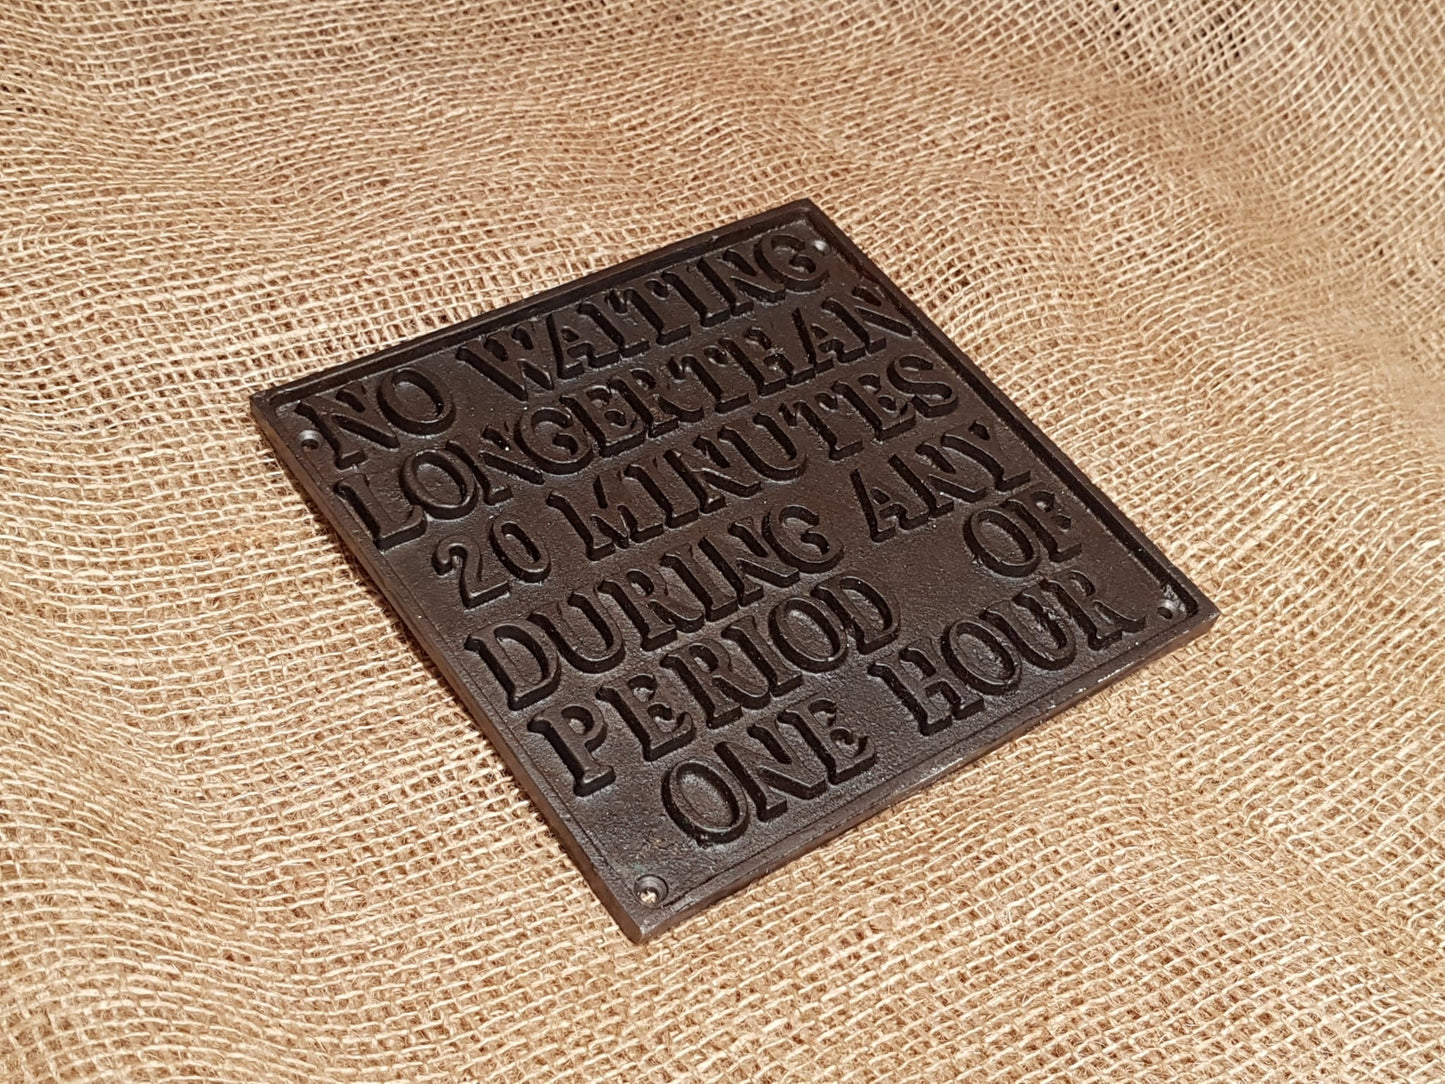 No Waiting longer than 20 Minutes - Spearhead Collection - Plaques and Signs - Exterior Decor, Home Decor, Office Decor, Plaques and Signs